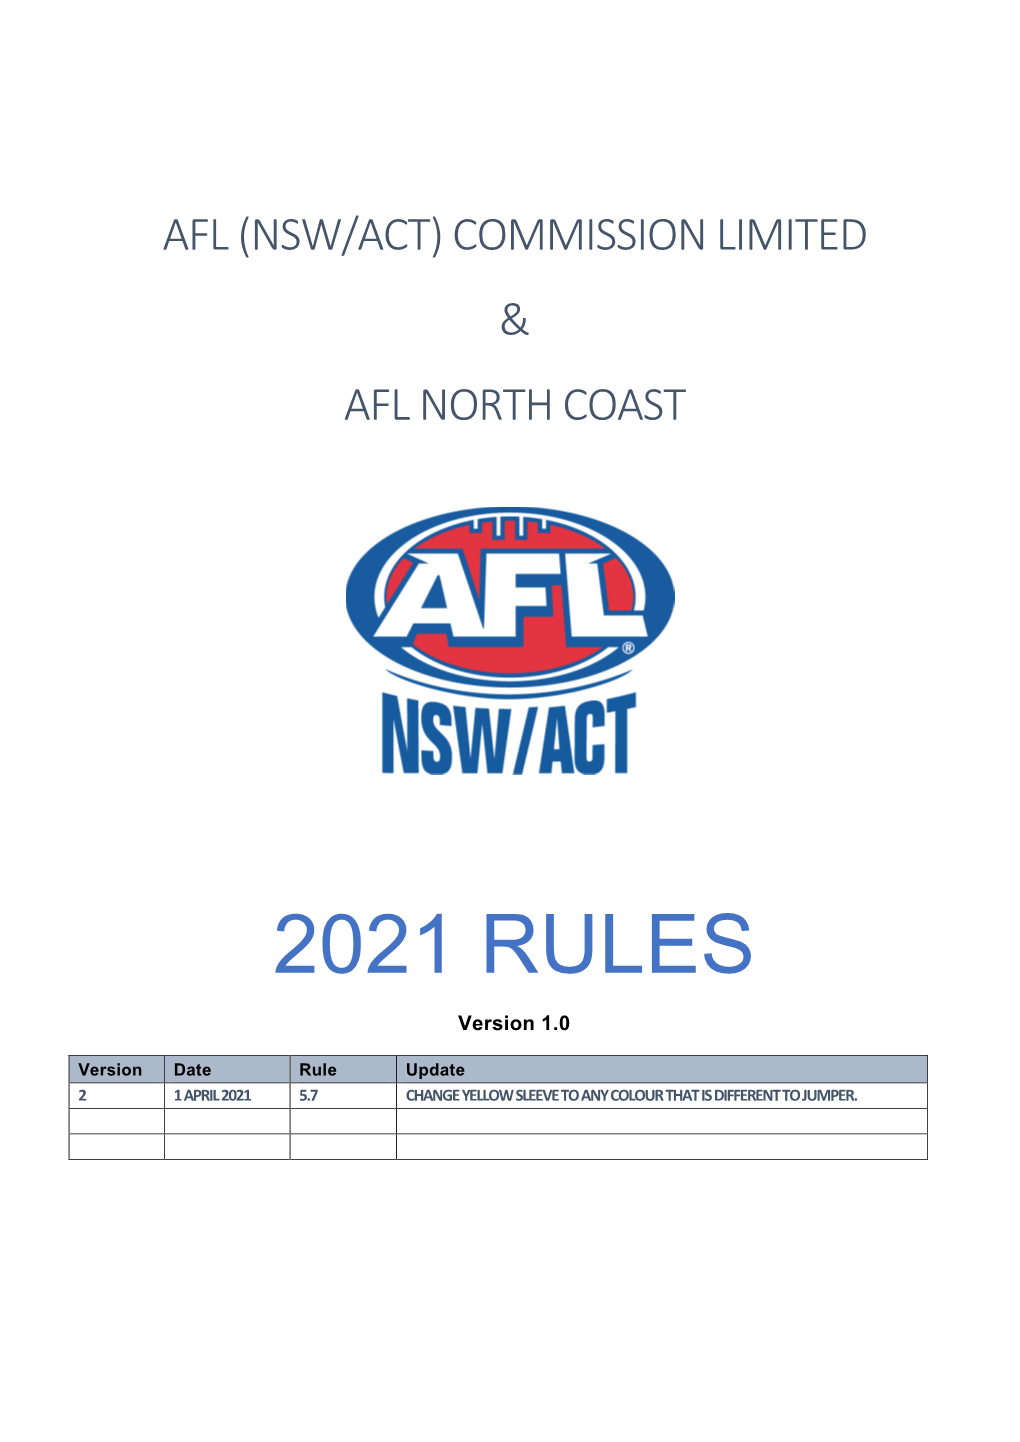 2021 RULES Version 1.0